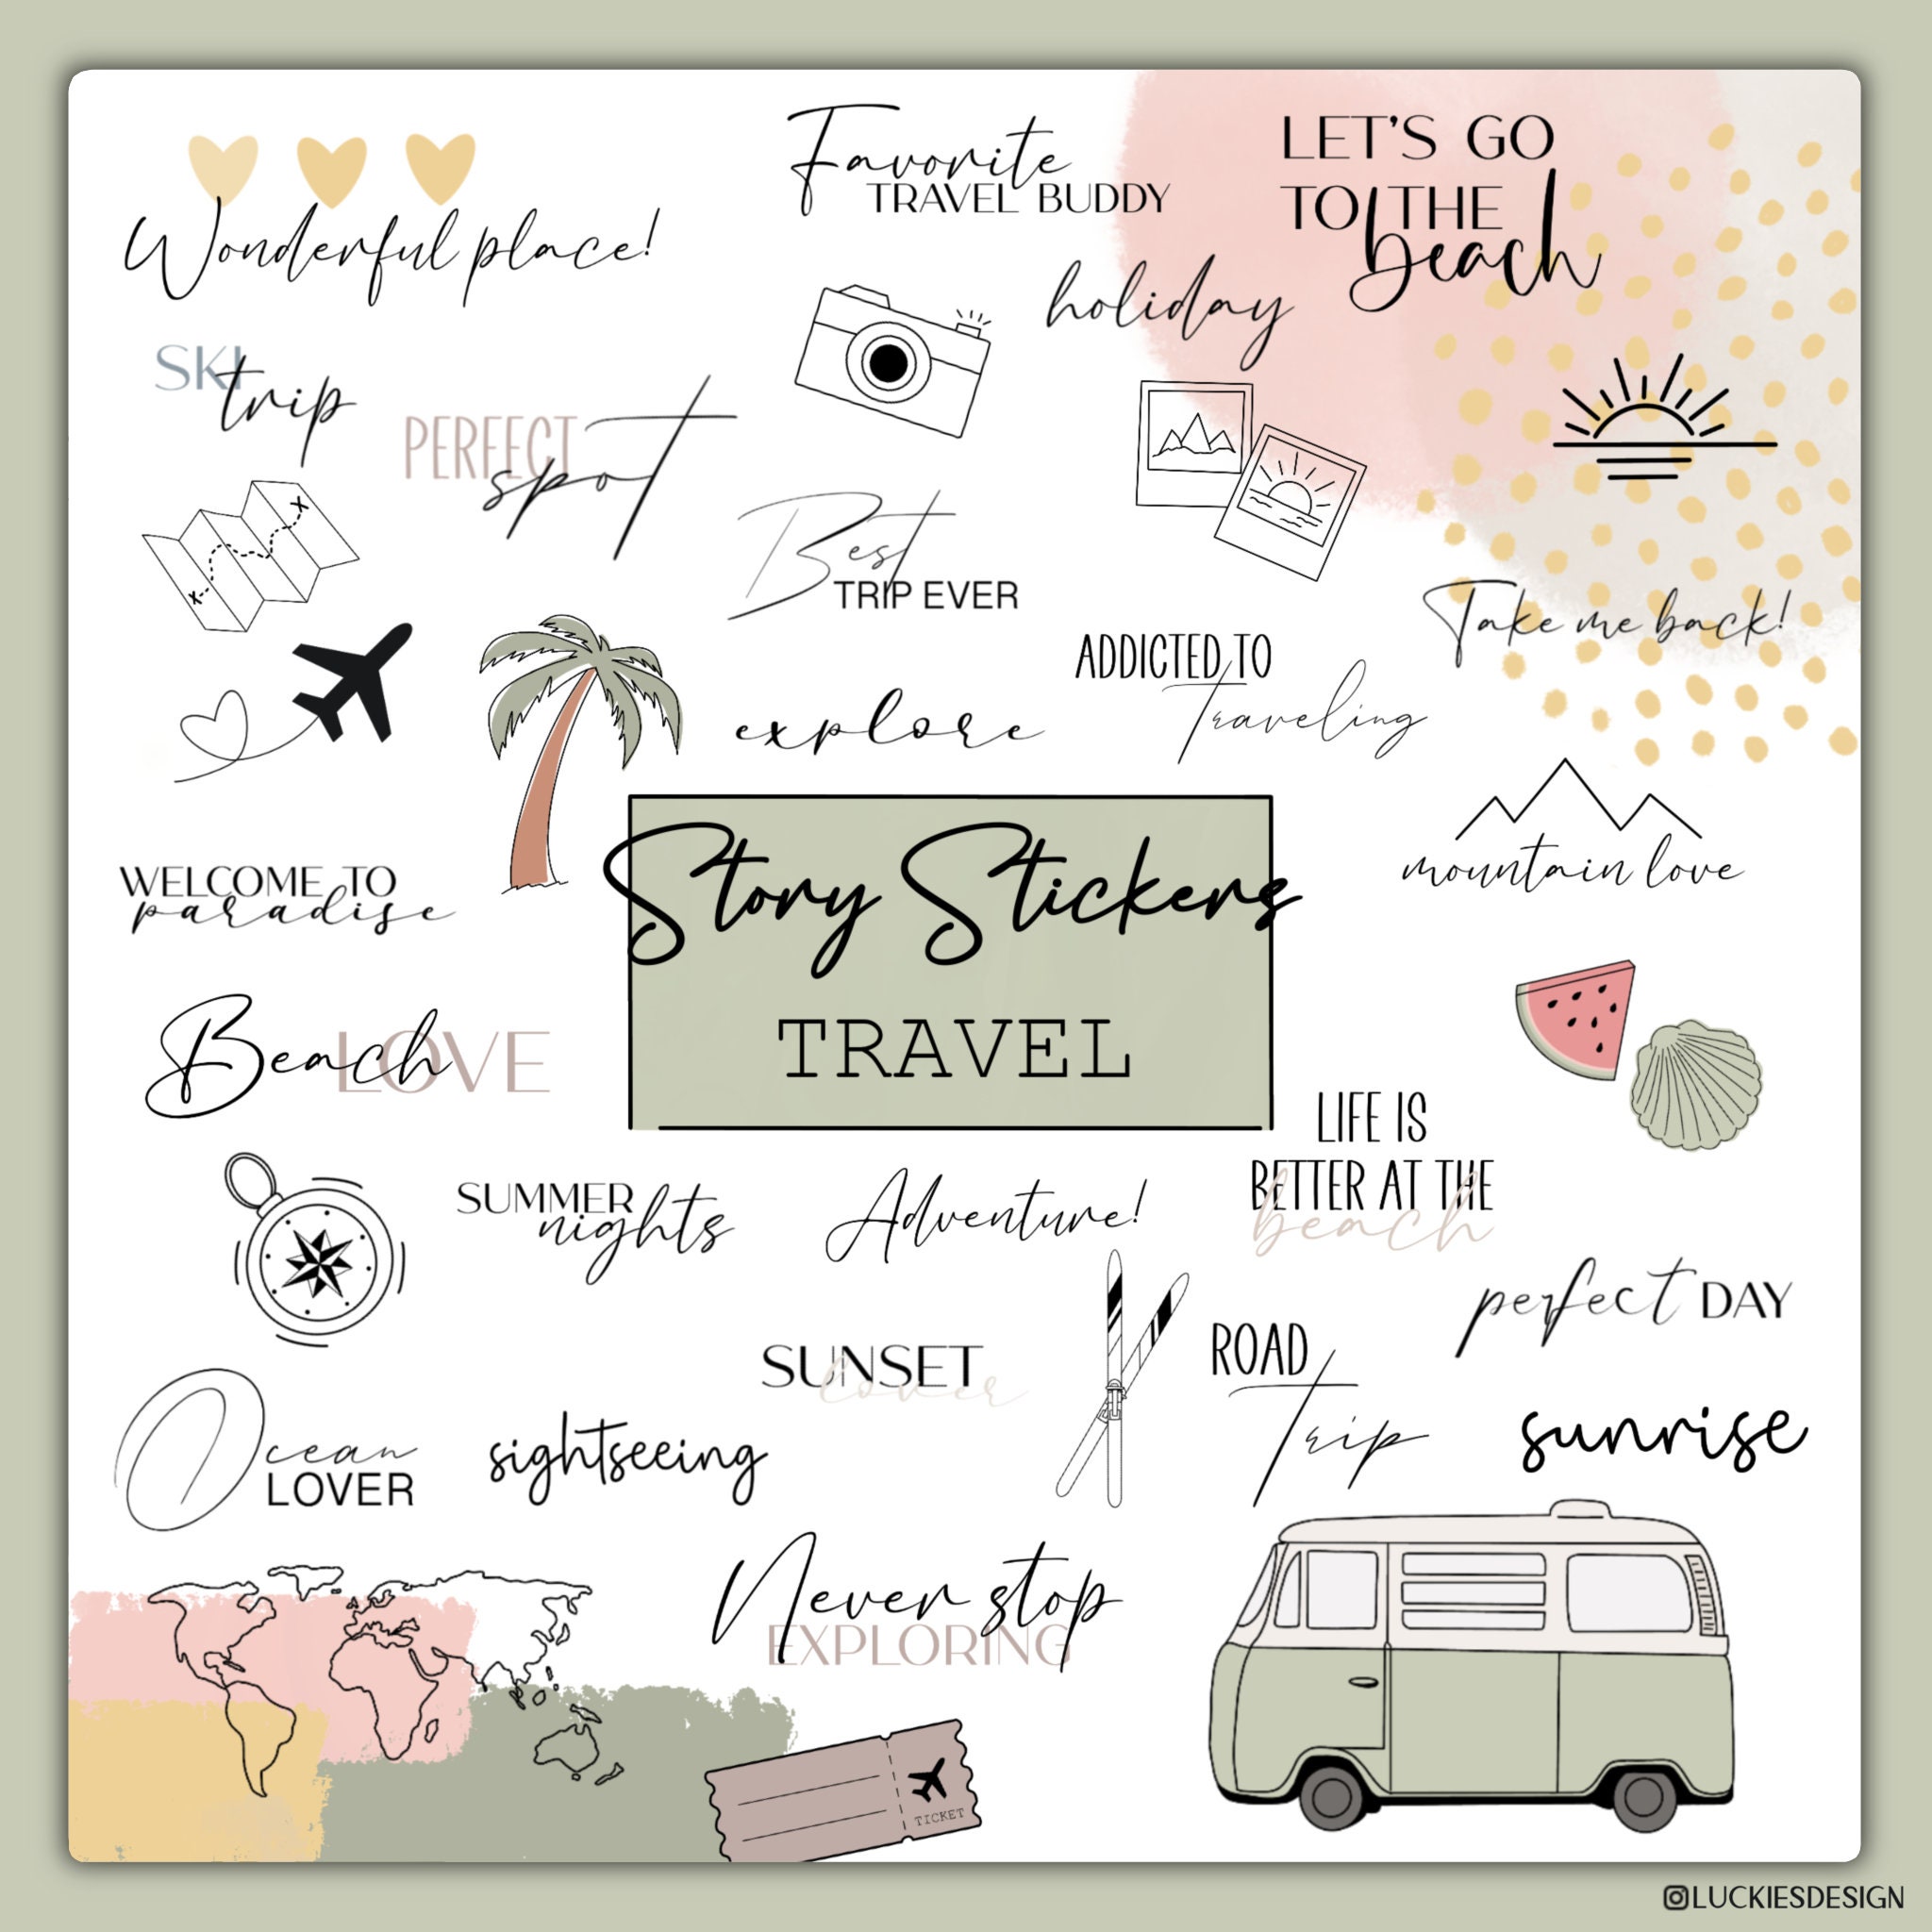 Buy 200 Story Sticker Instagram Travel Holiday Vacation Digital Download  Daily Urlaub Online in India 